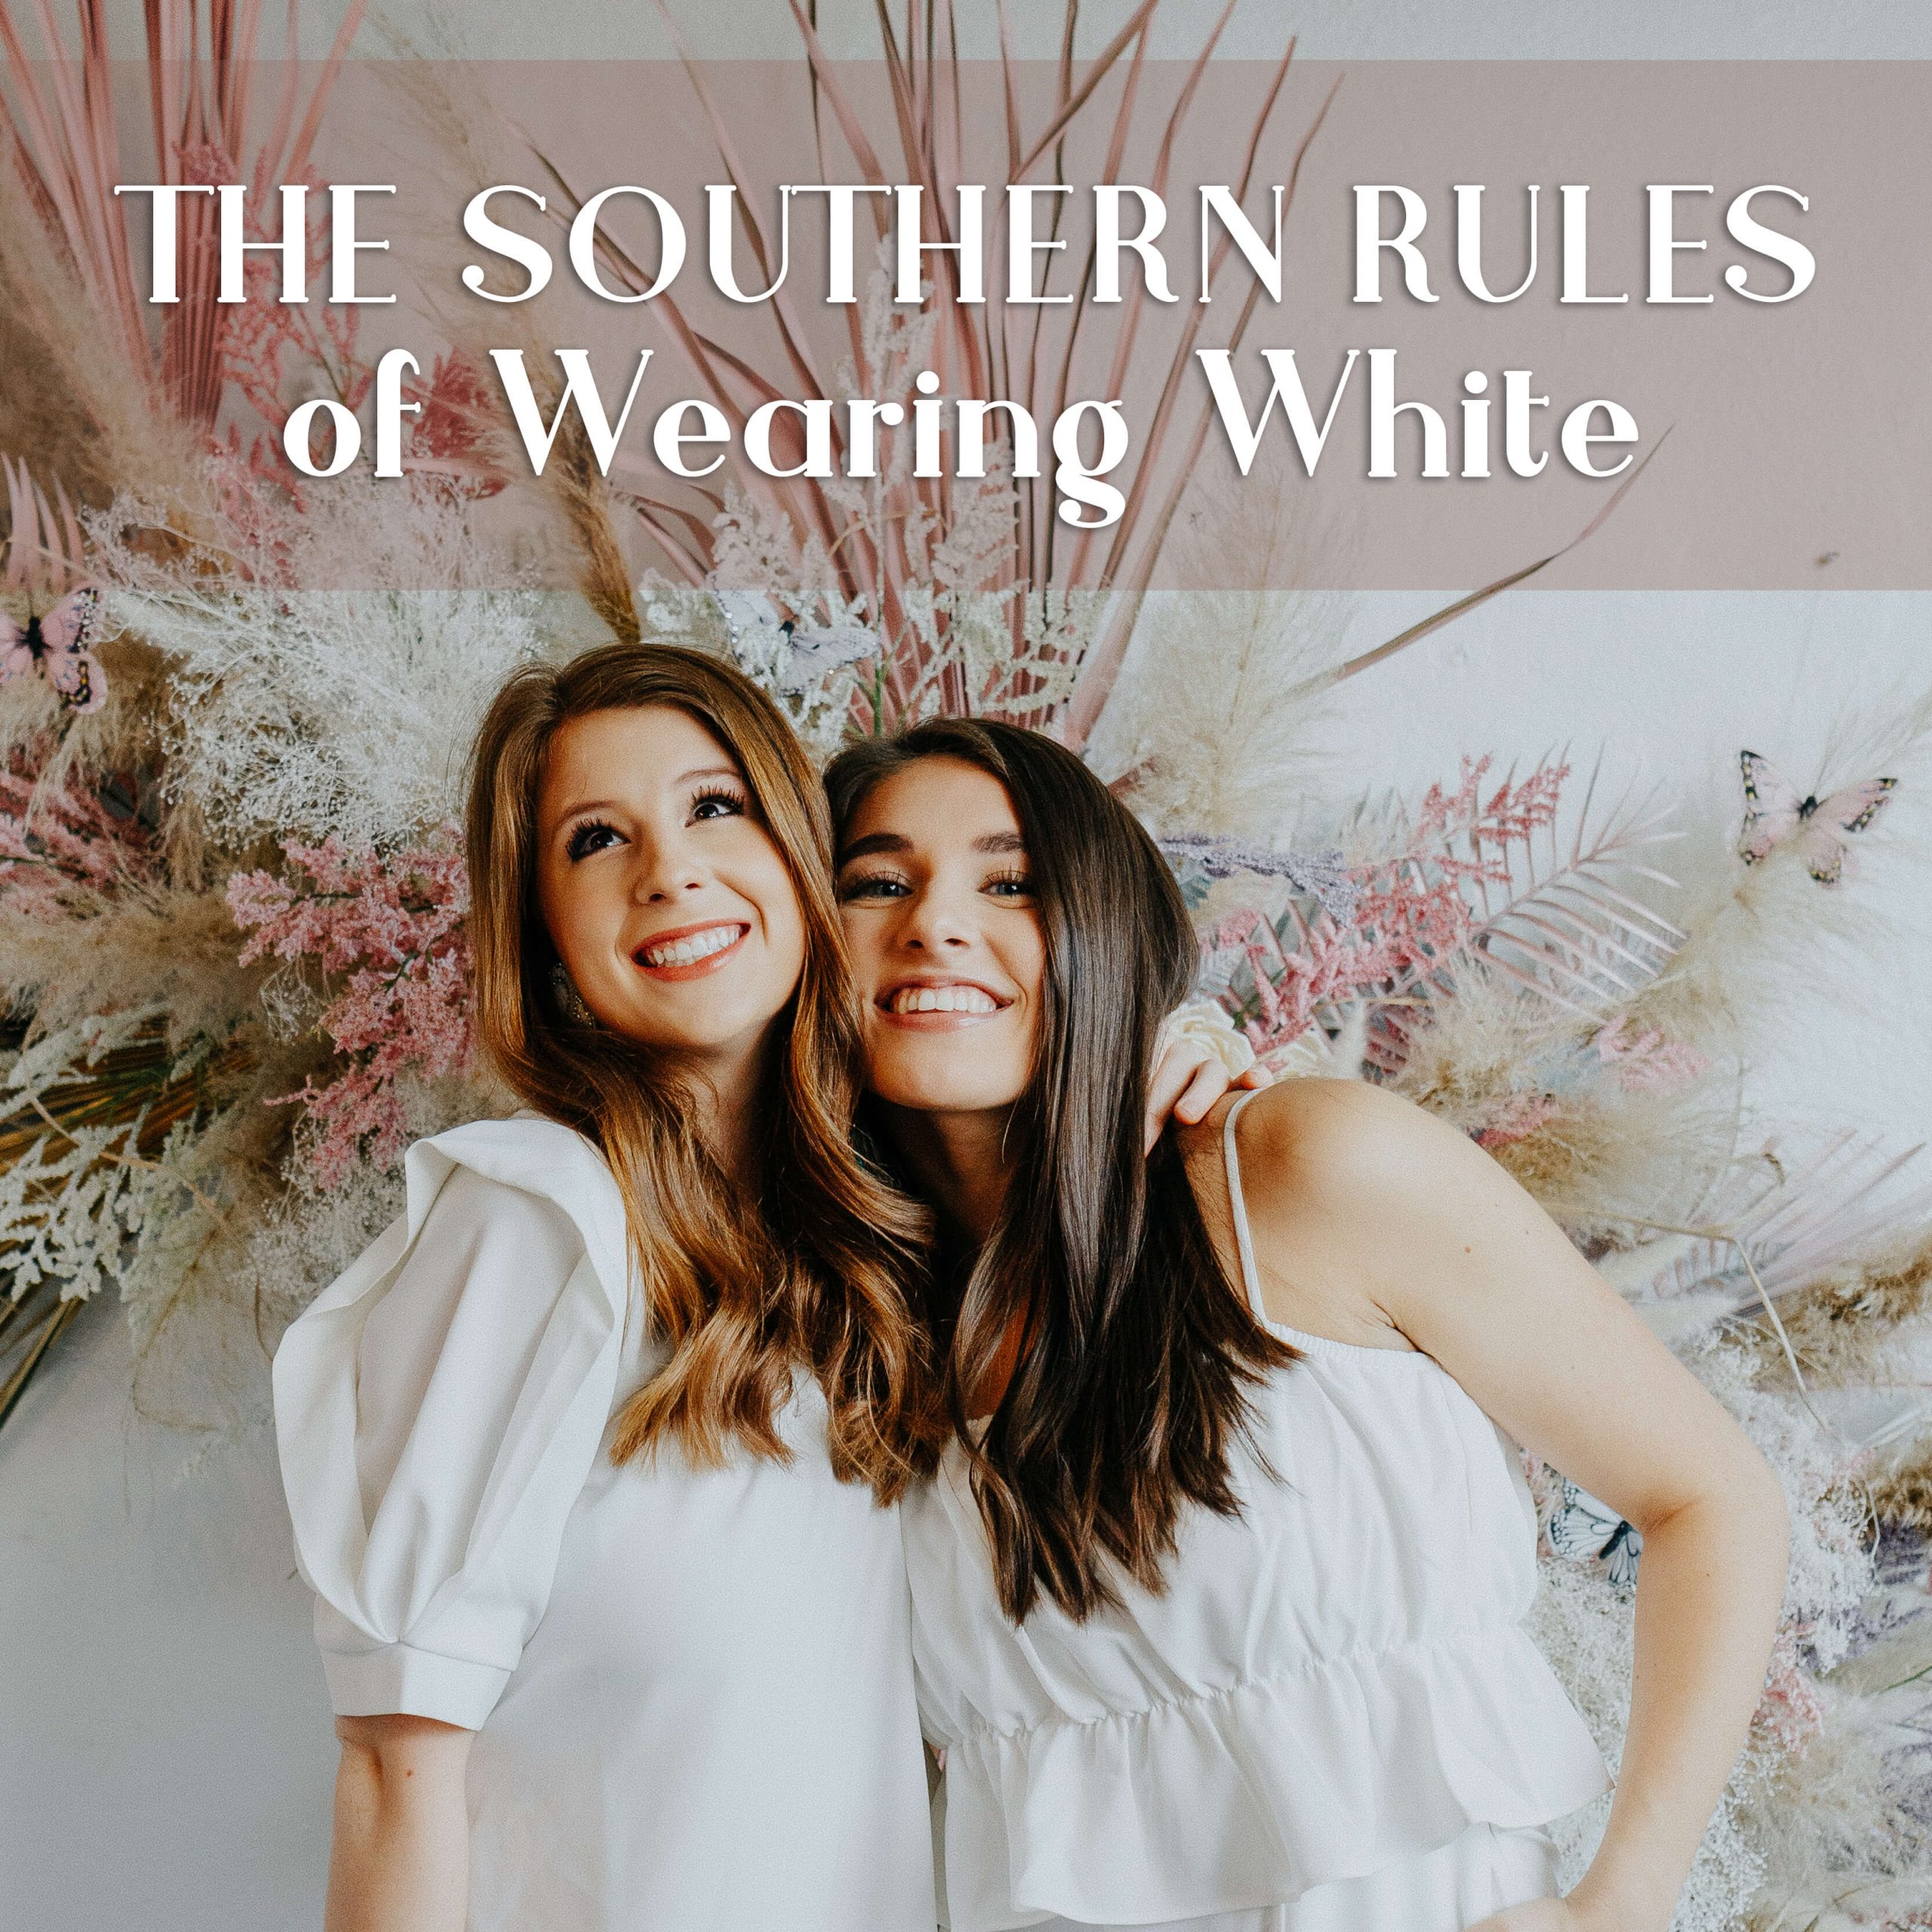 The Southern Rules of Wearing White